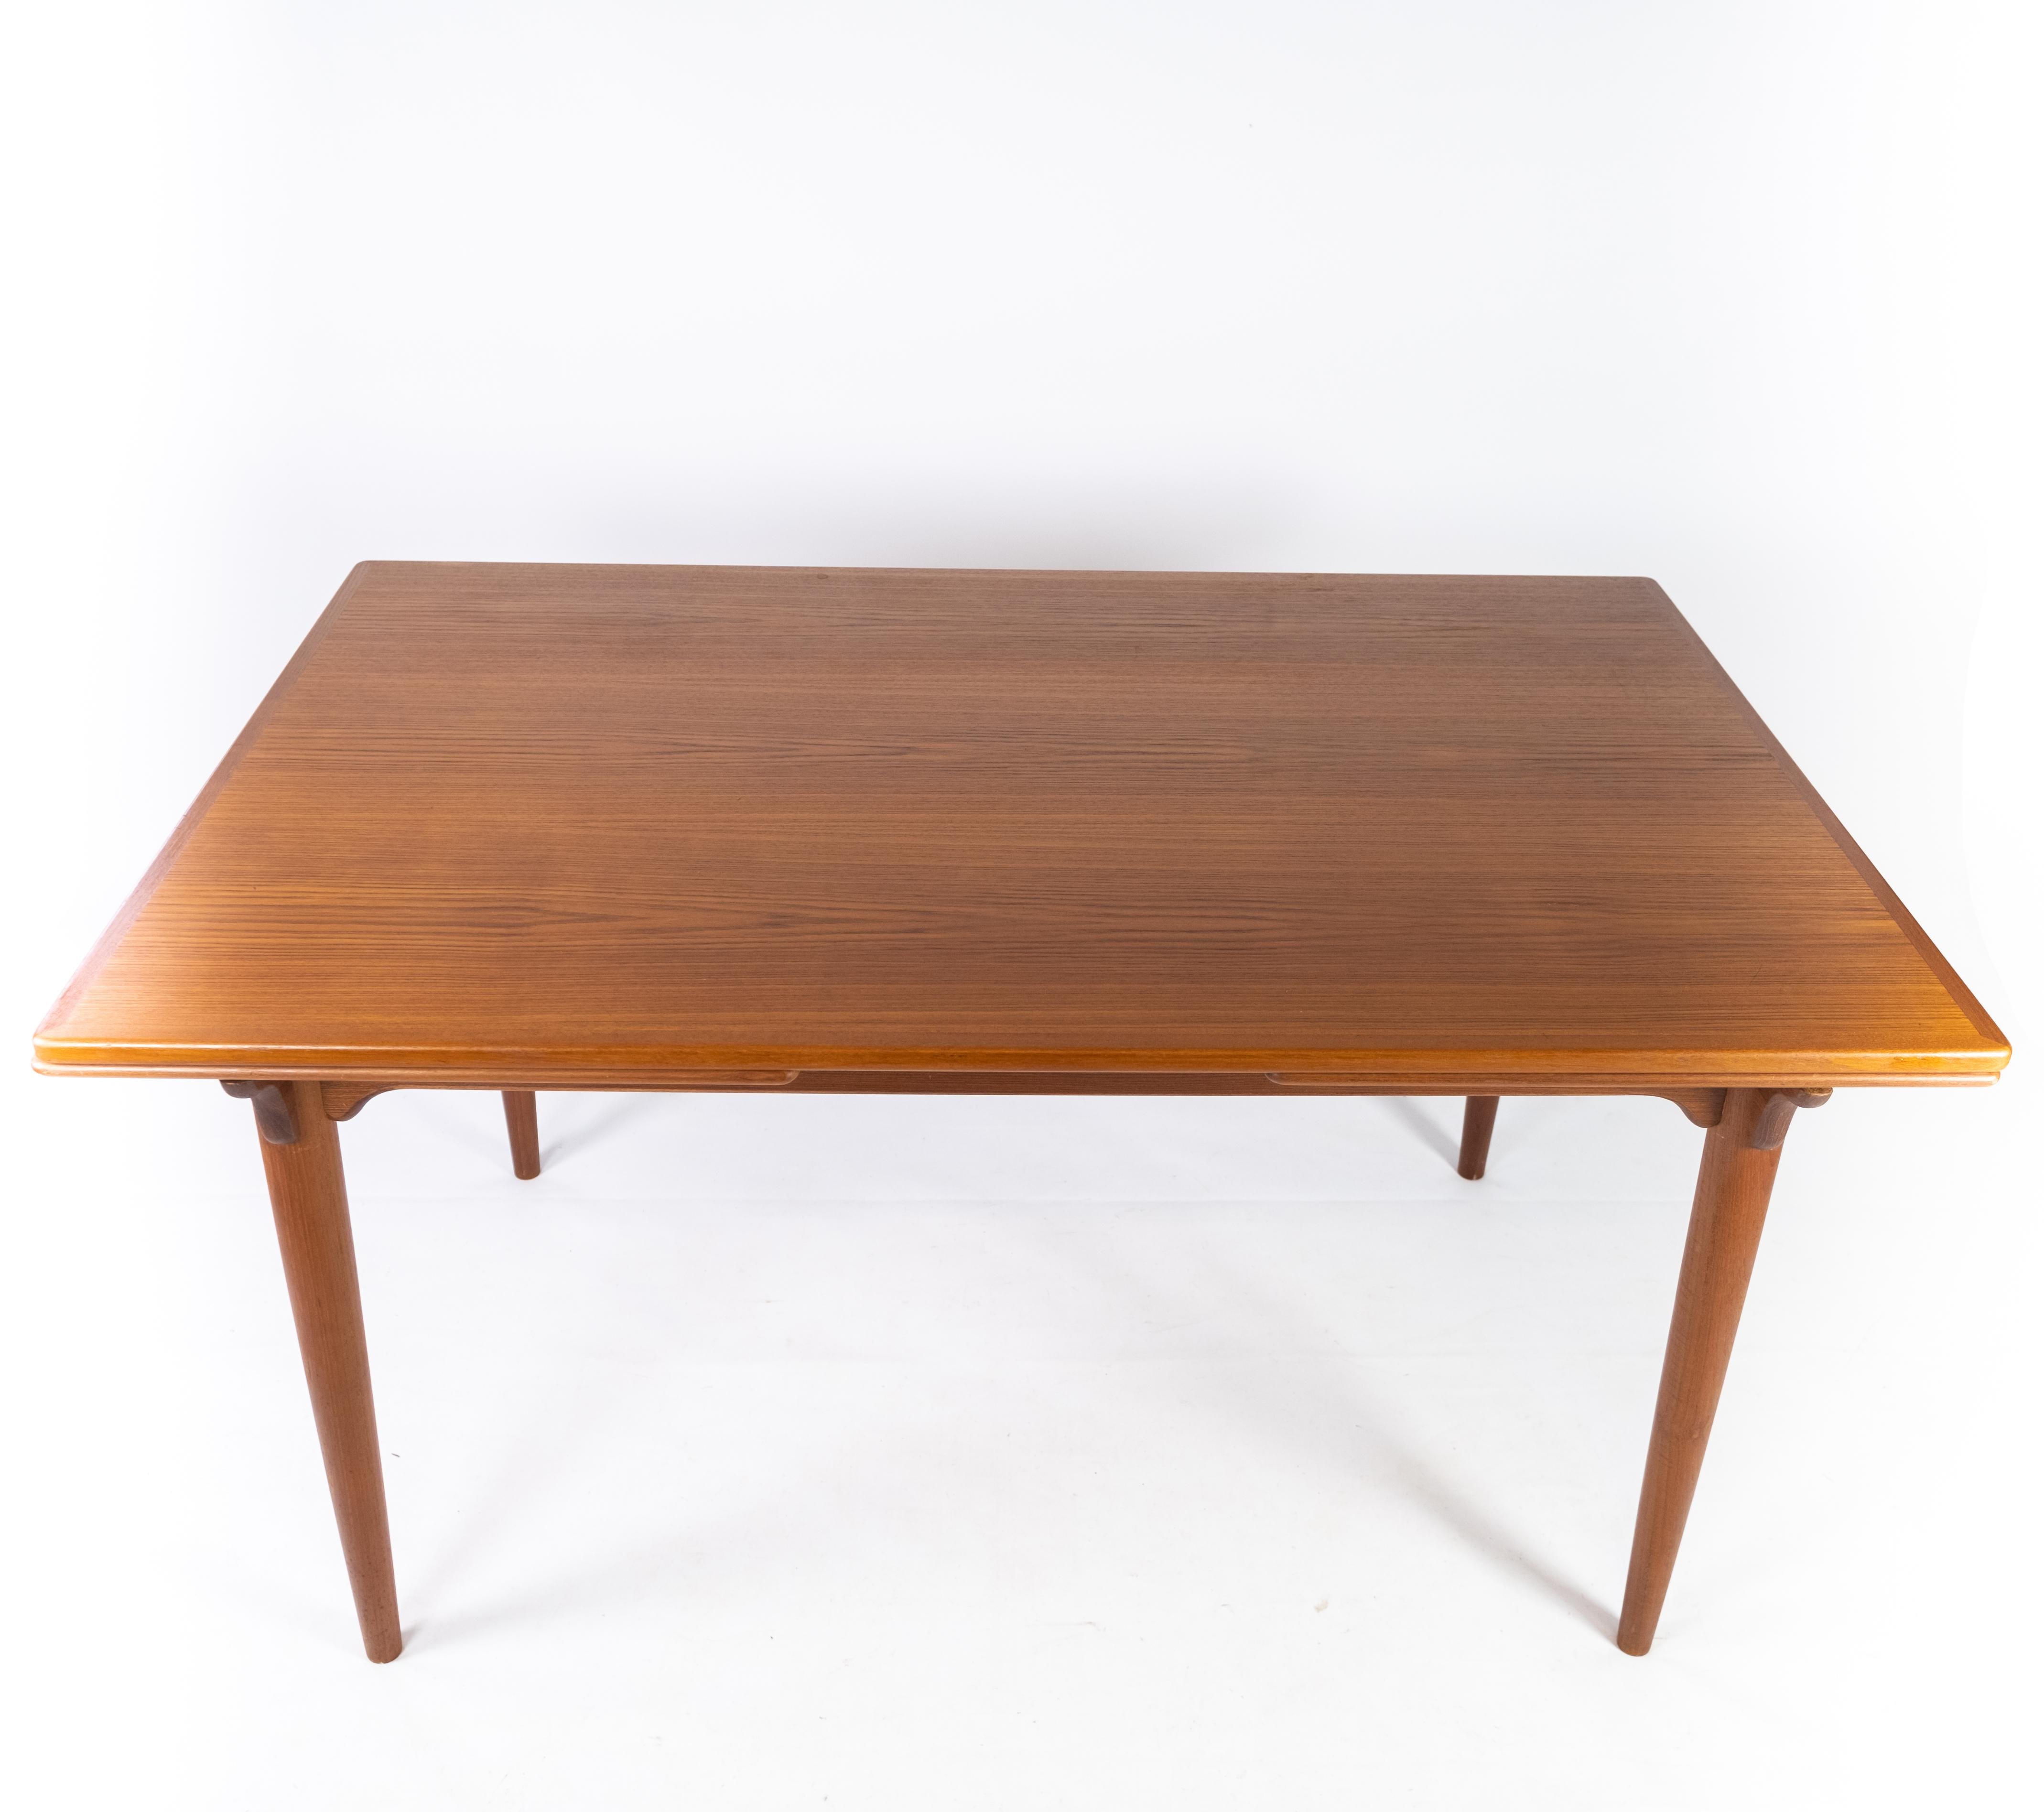 Mid-20th Century Dining Table Made In Teak With Extentions, Danish Design From 1960s For Sale